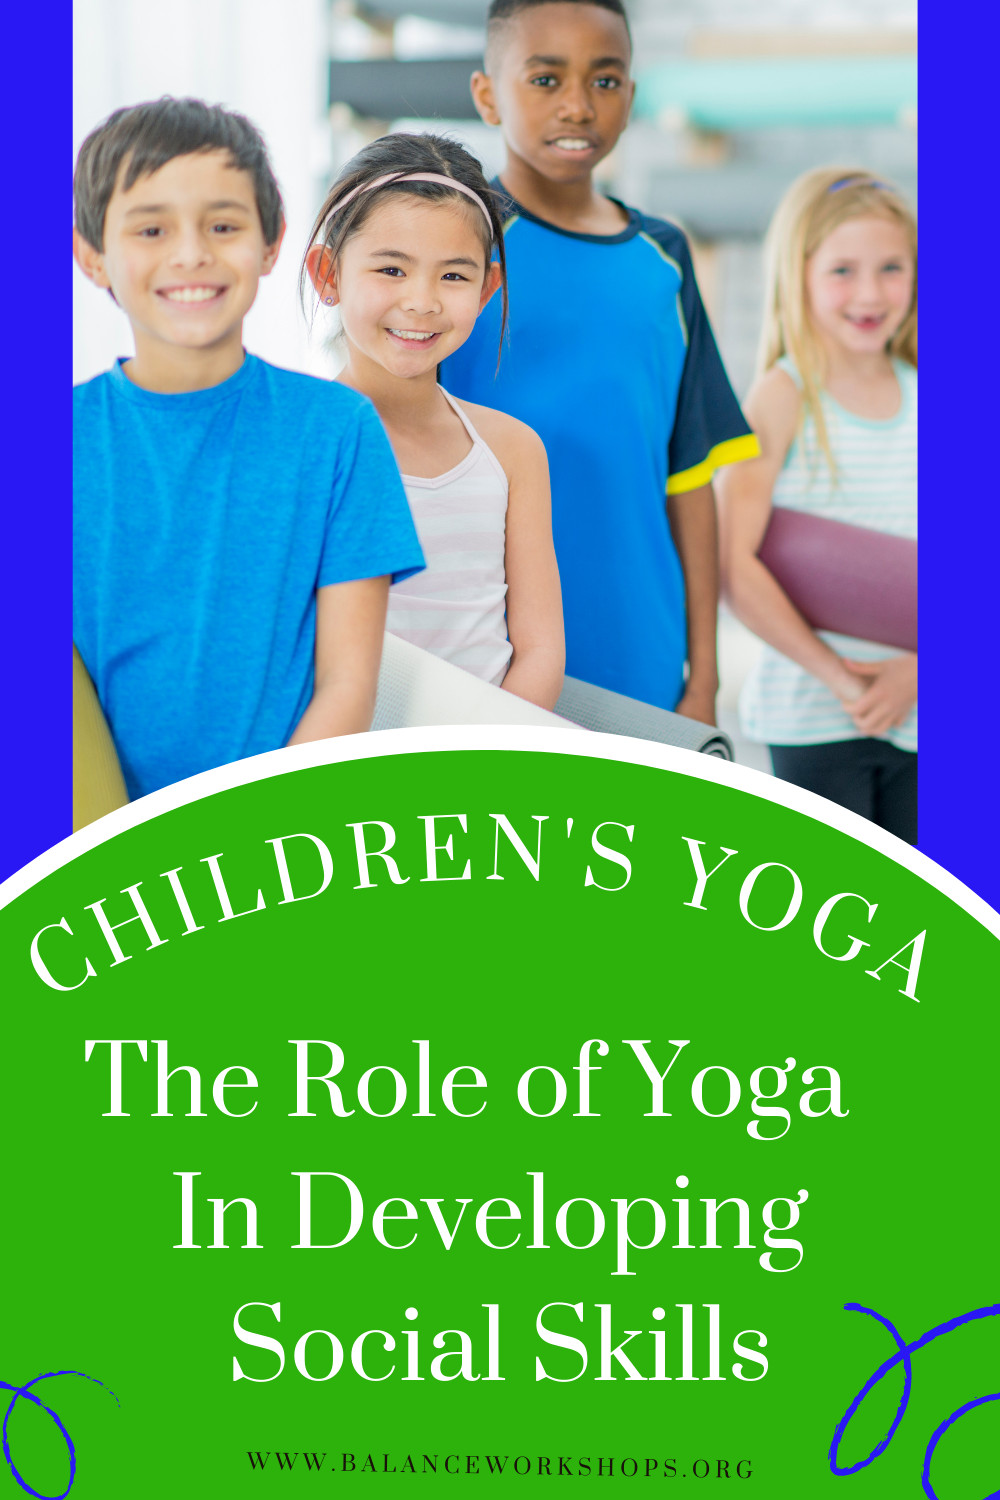 The Role of Yoga in Developing Social Skills